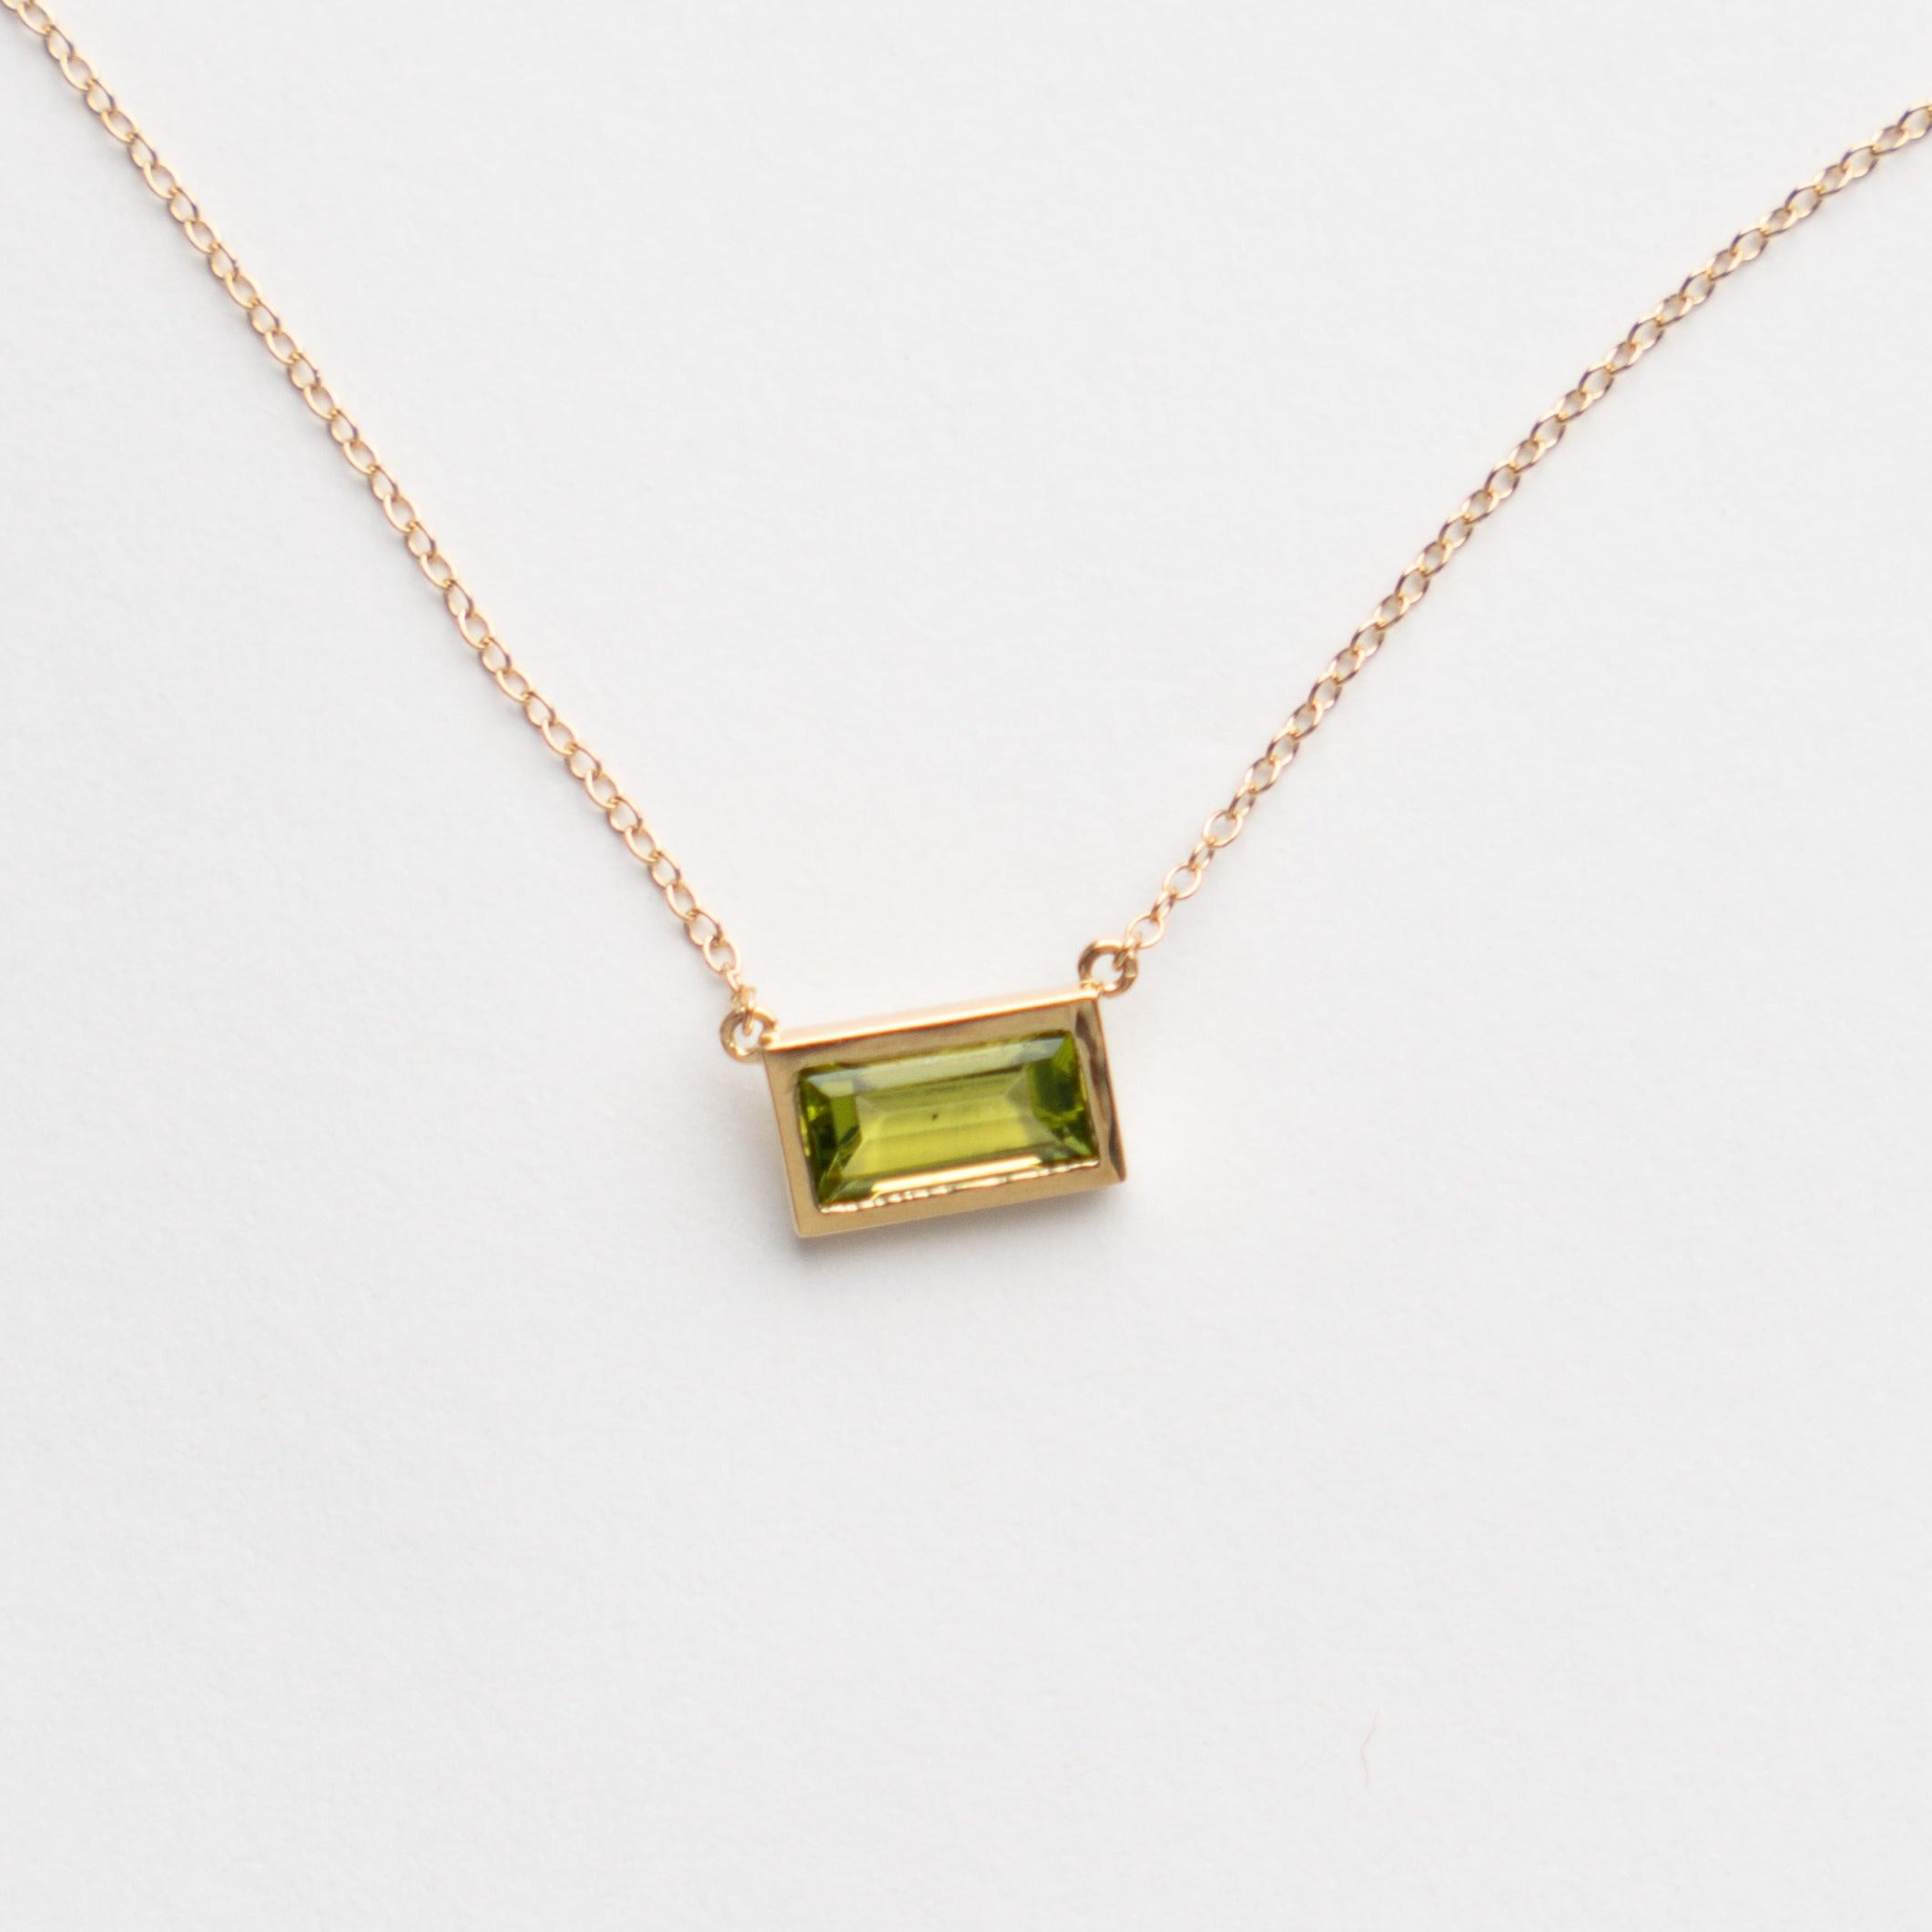 Unique Didi necklace in 14 karat gold set with peridot made in NYC by SHW fine Jewelry